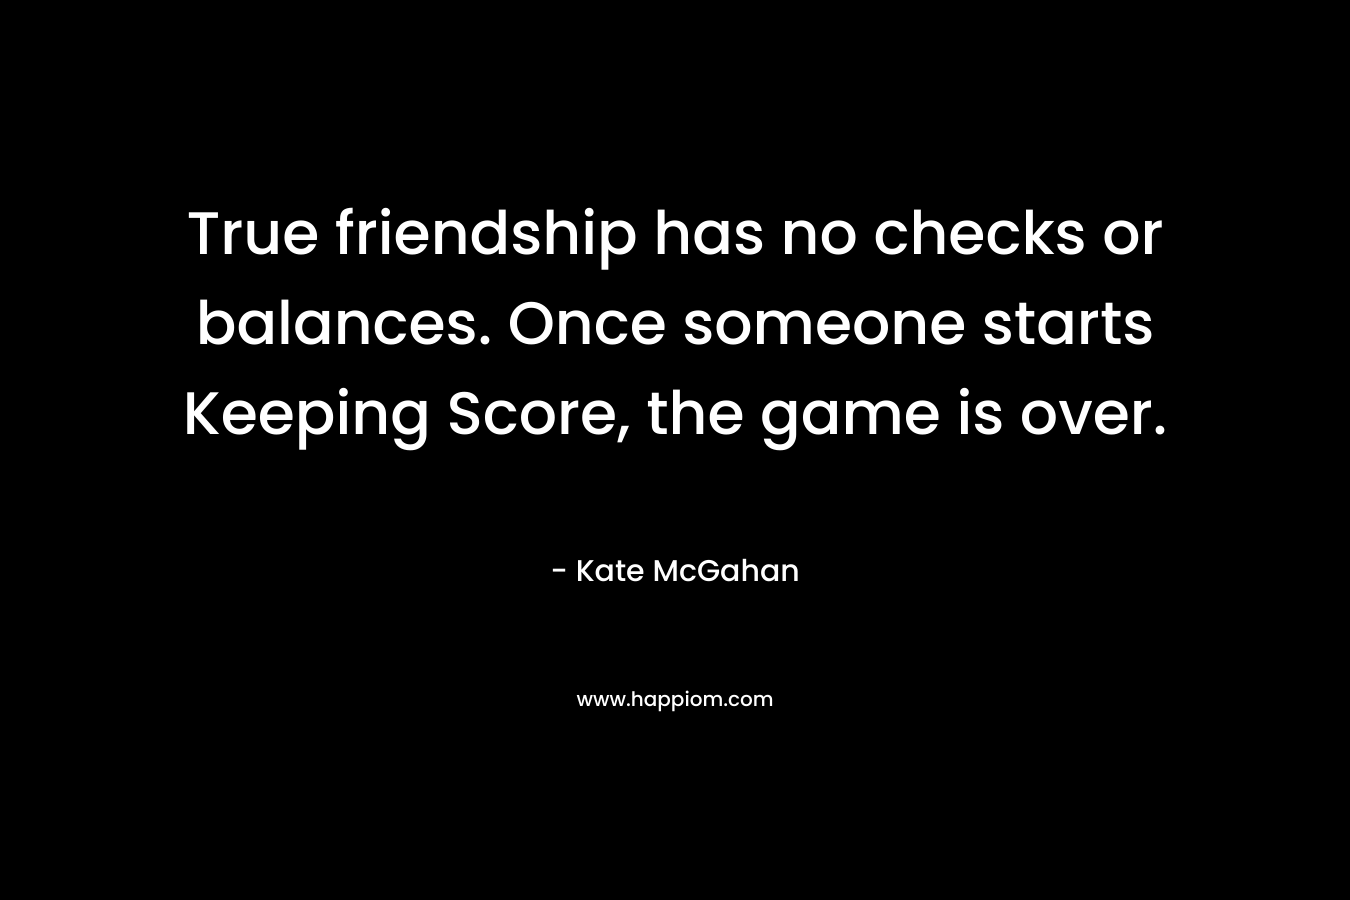 True friendship has no checks or balances. Once someone starts Keeping Score, the game is over.